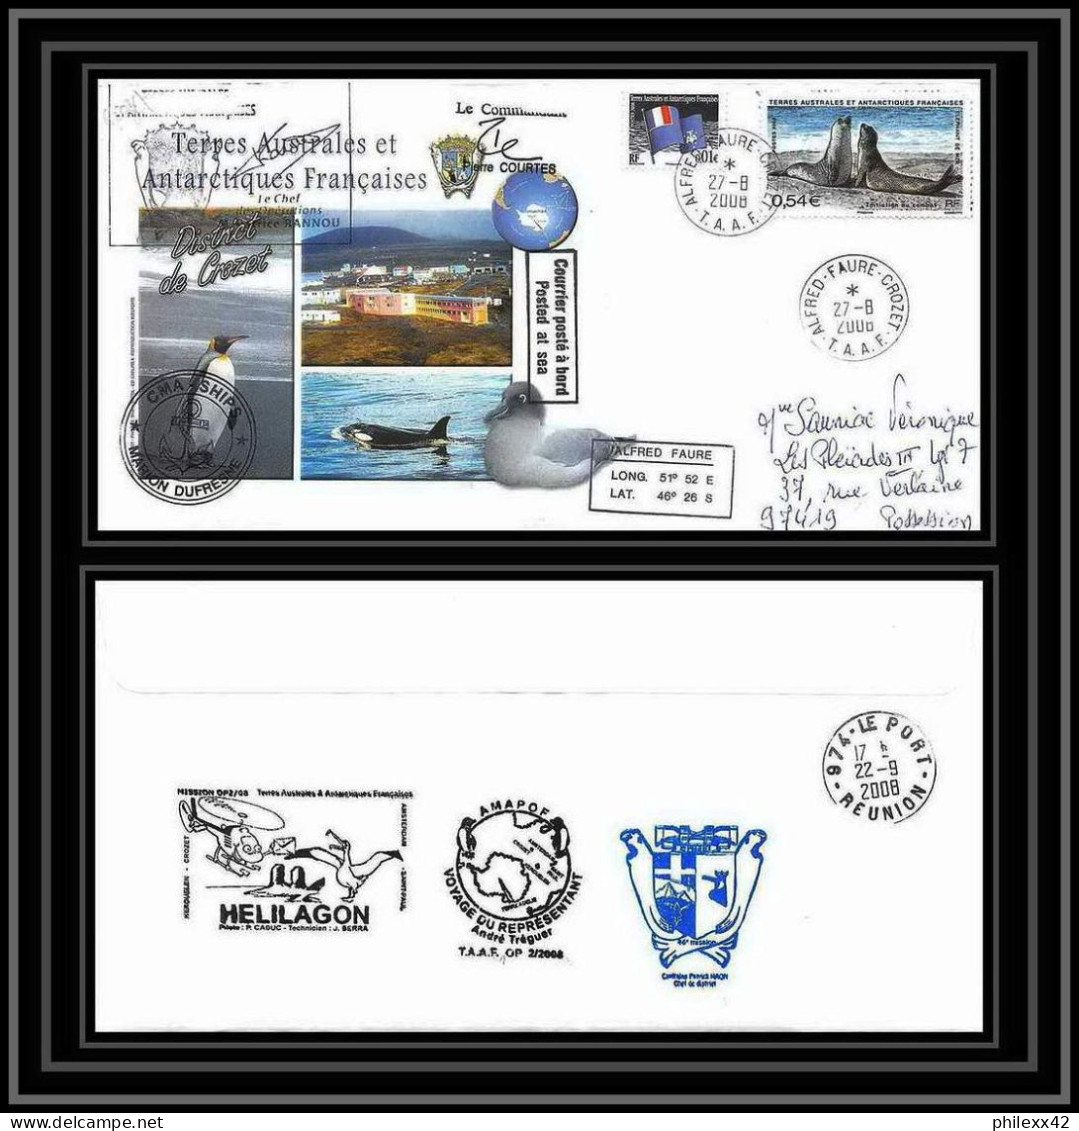 2824 Sea Elephant Terres Australes TAAF Helilagon Lettre Cover Dufresne Signé Signed Op 2008/2 CROZET N°512 27/8/2008 - Hélicoptères